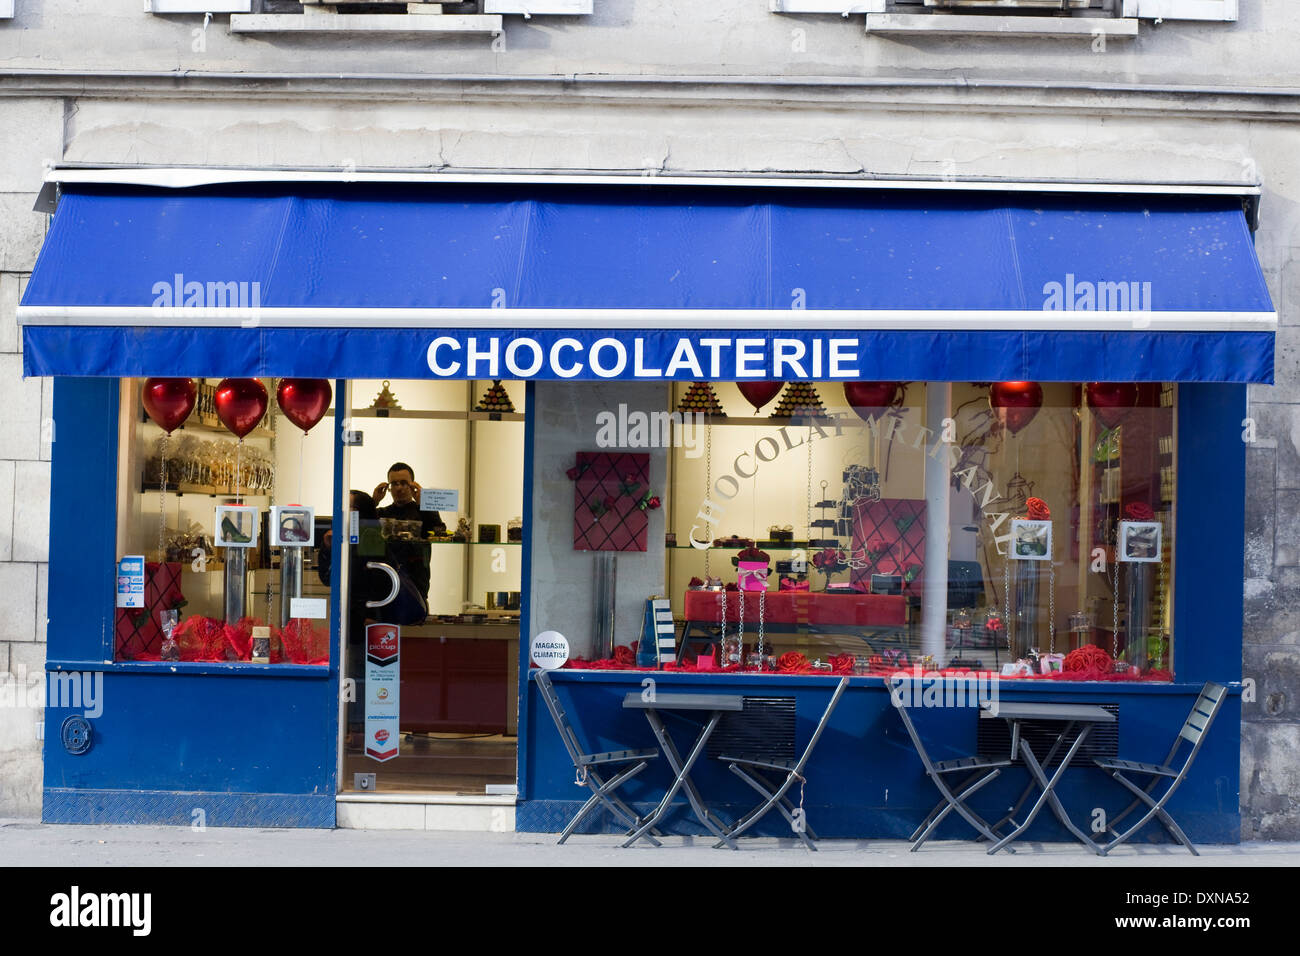 Sign and Awning Entrance to Café on the streets of Paris France Stock Photo